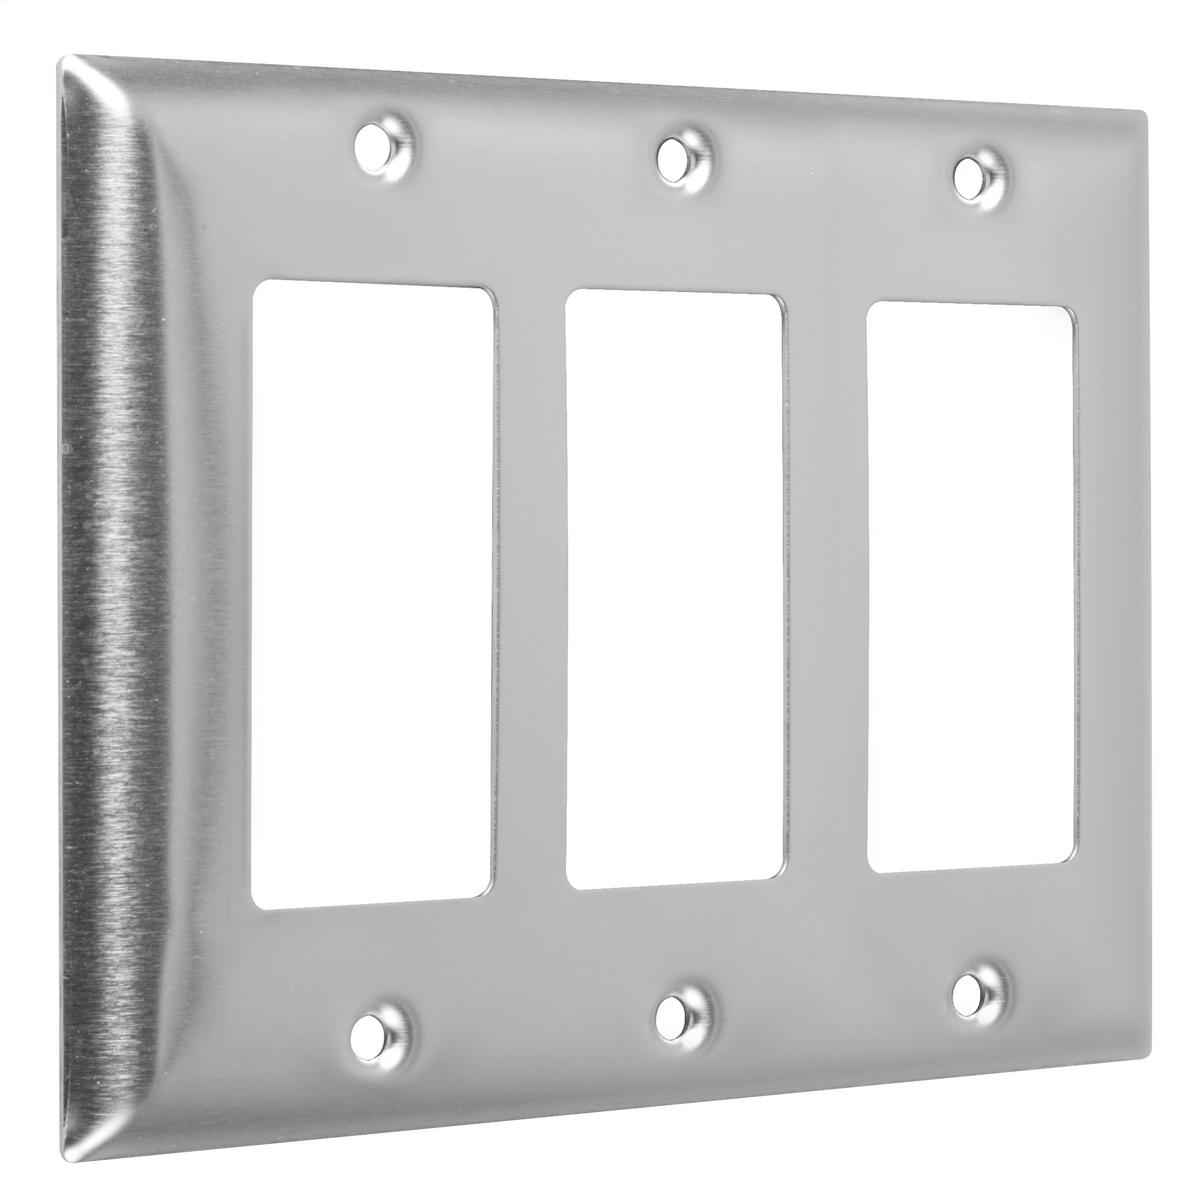 Hubbell WSS-RRR 3-Gang Metal Wallplate, Standard, 3-Decorator, Stainless Steel  ; Easily primed and painted to match or complement walls. ; Won't bow, crack or distort during installation. ; Premium North American powder coat. ; Includes screw(s) in matching finish.